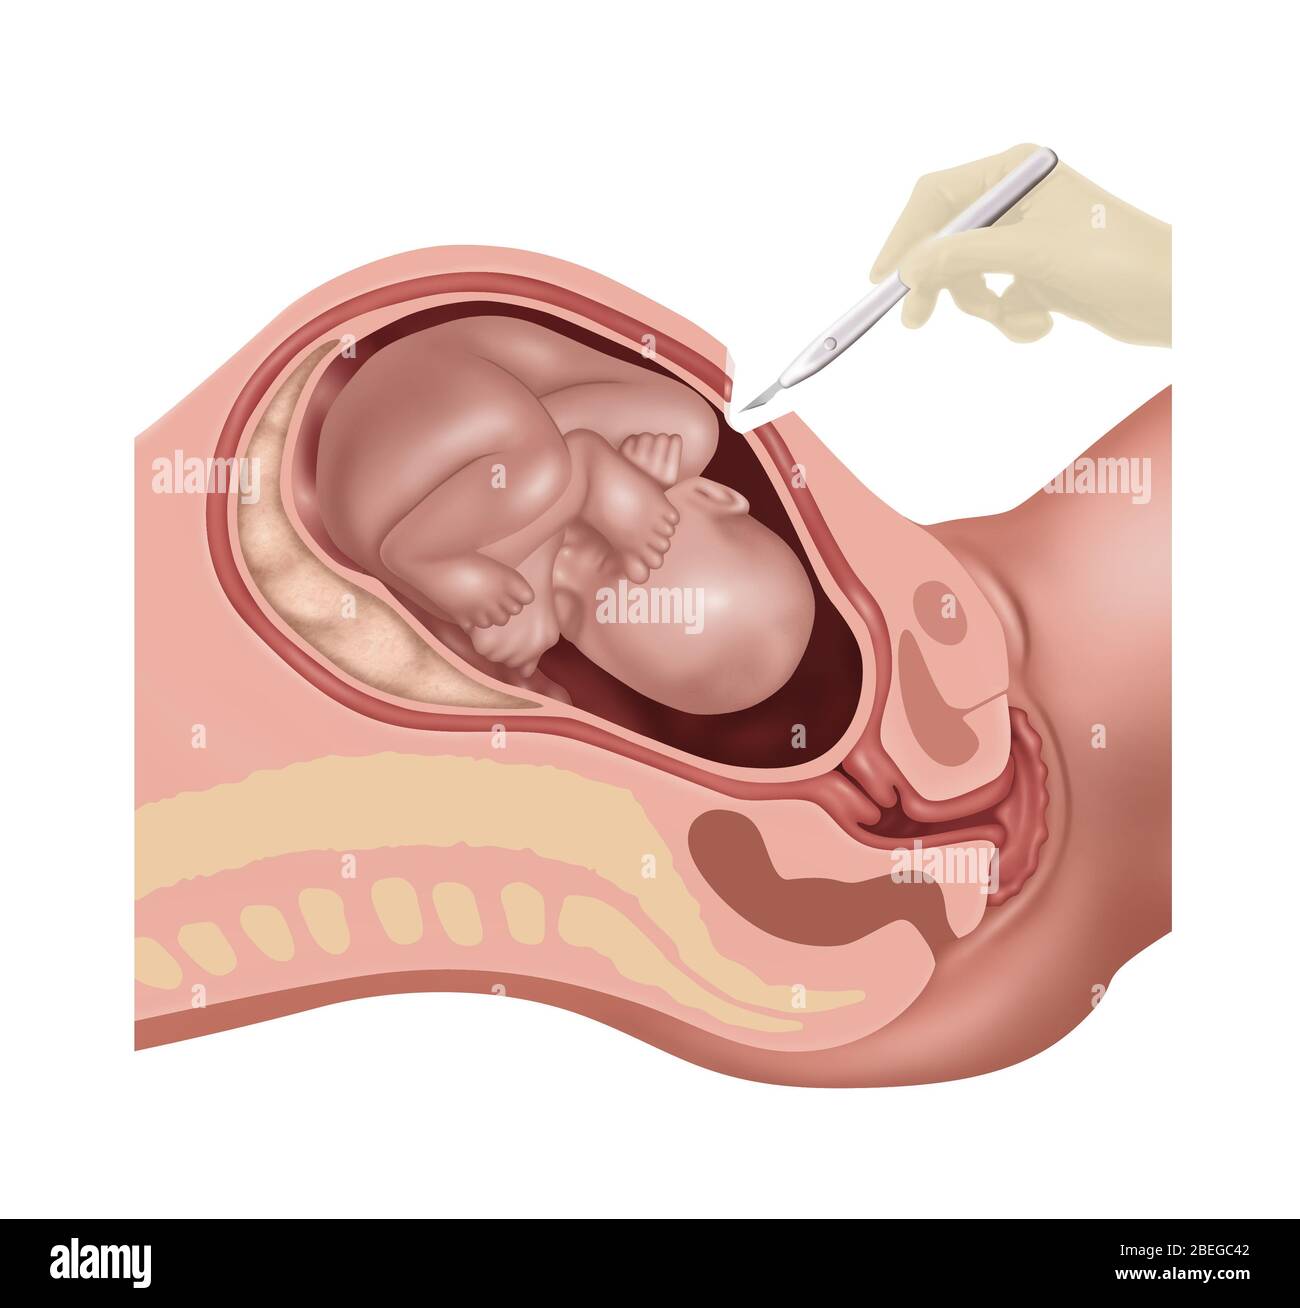 Cesarean Section Steps, Illustration, 1 of 4 Stock Photo